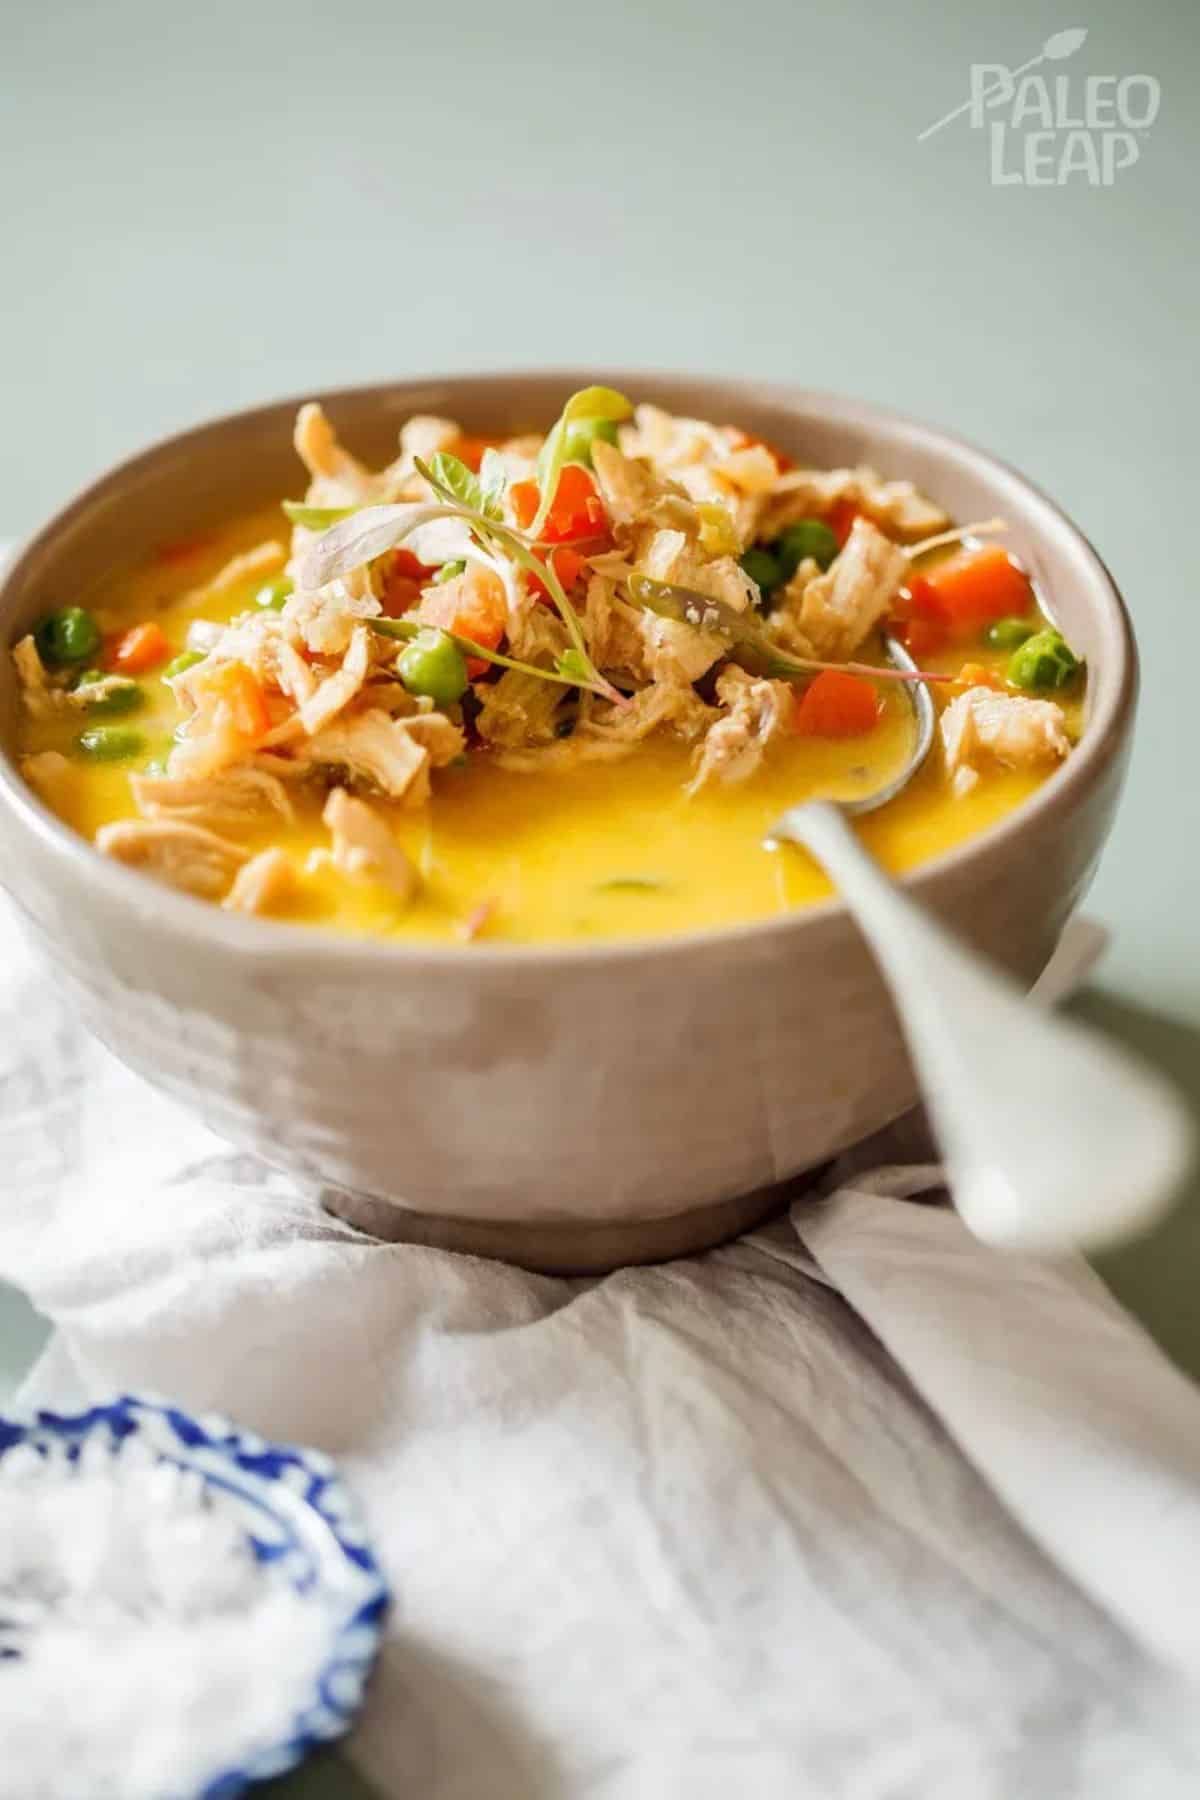 Paleo Chicken Pot Pie Soup in a white bowl with a spoon.